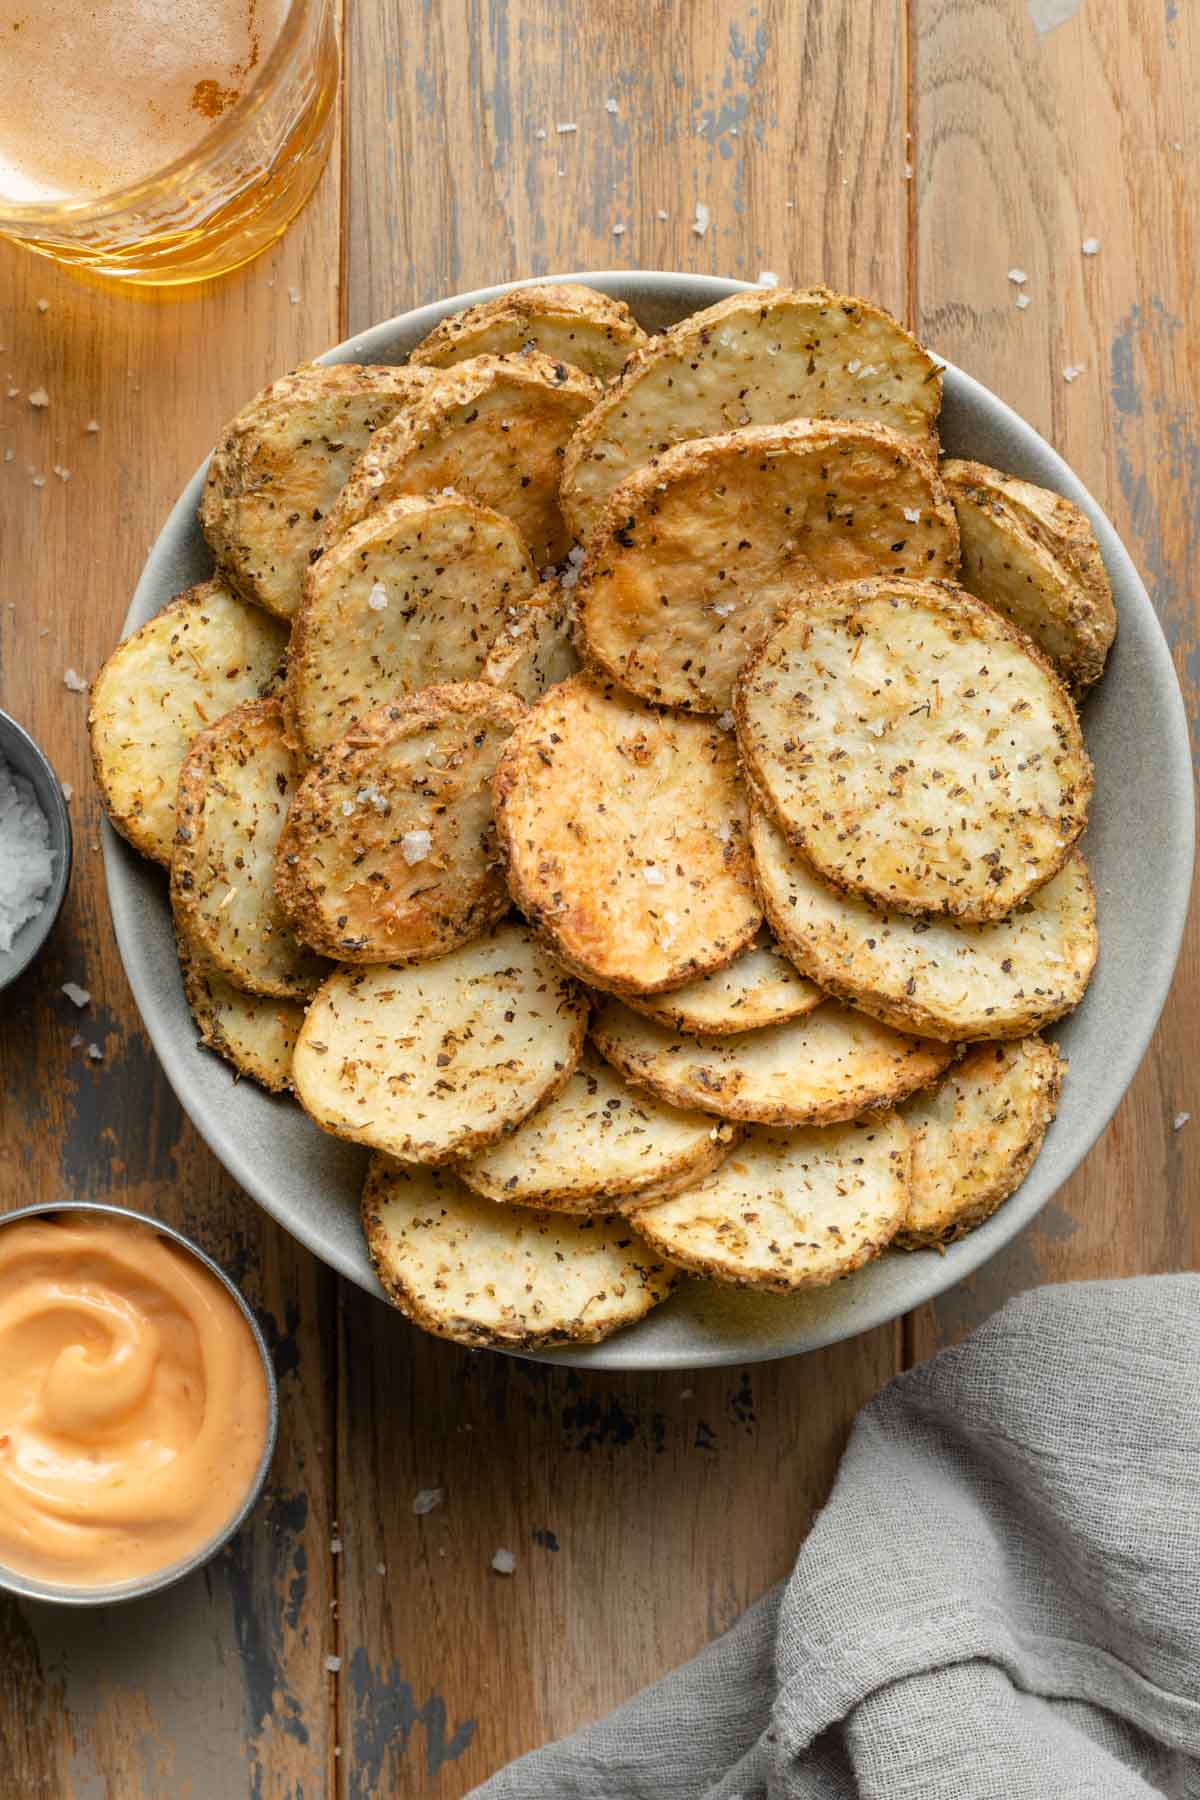 Overhead view of air fryer potato slices in a bowl on wooden backdrop next to dip, a drink and a grey napkin.